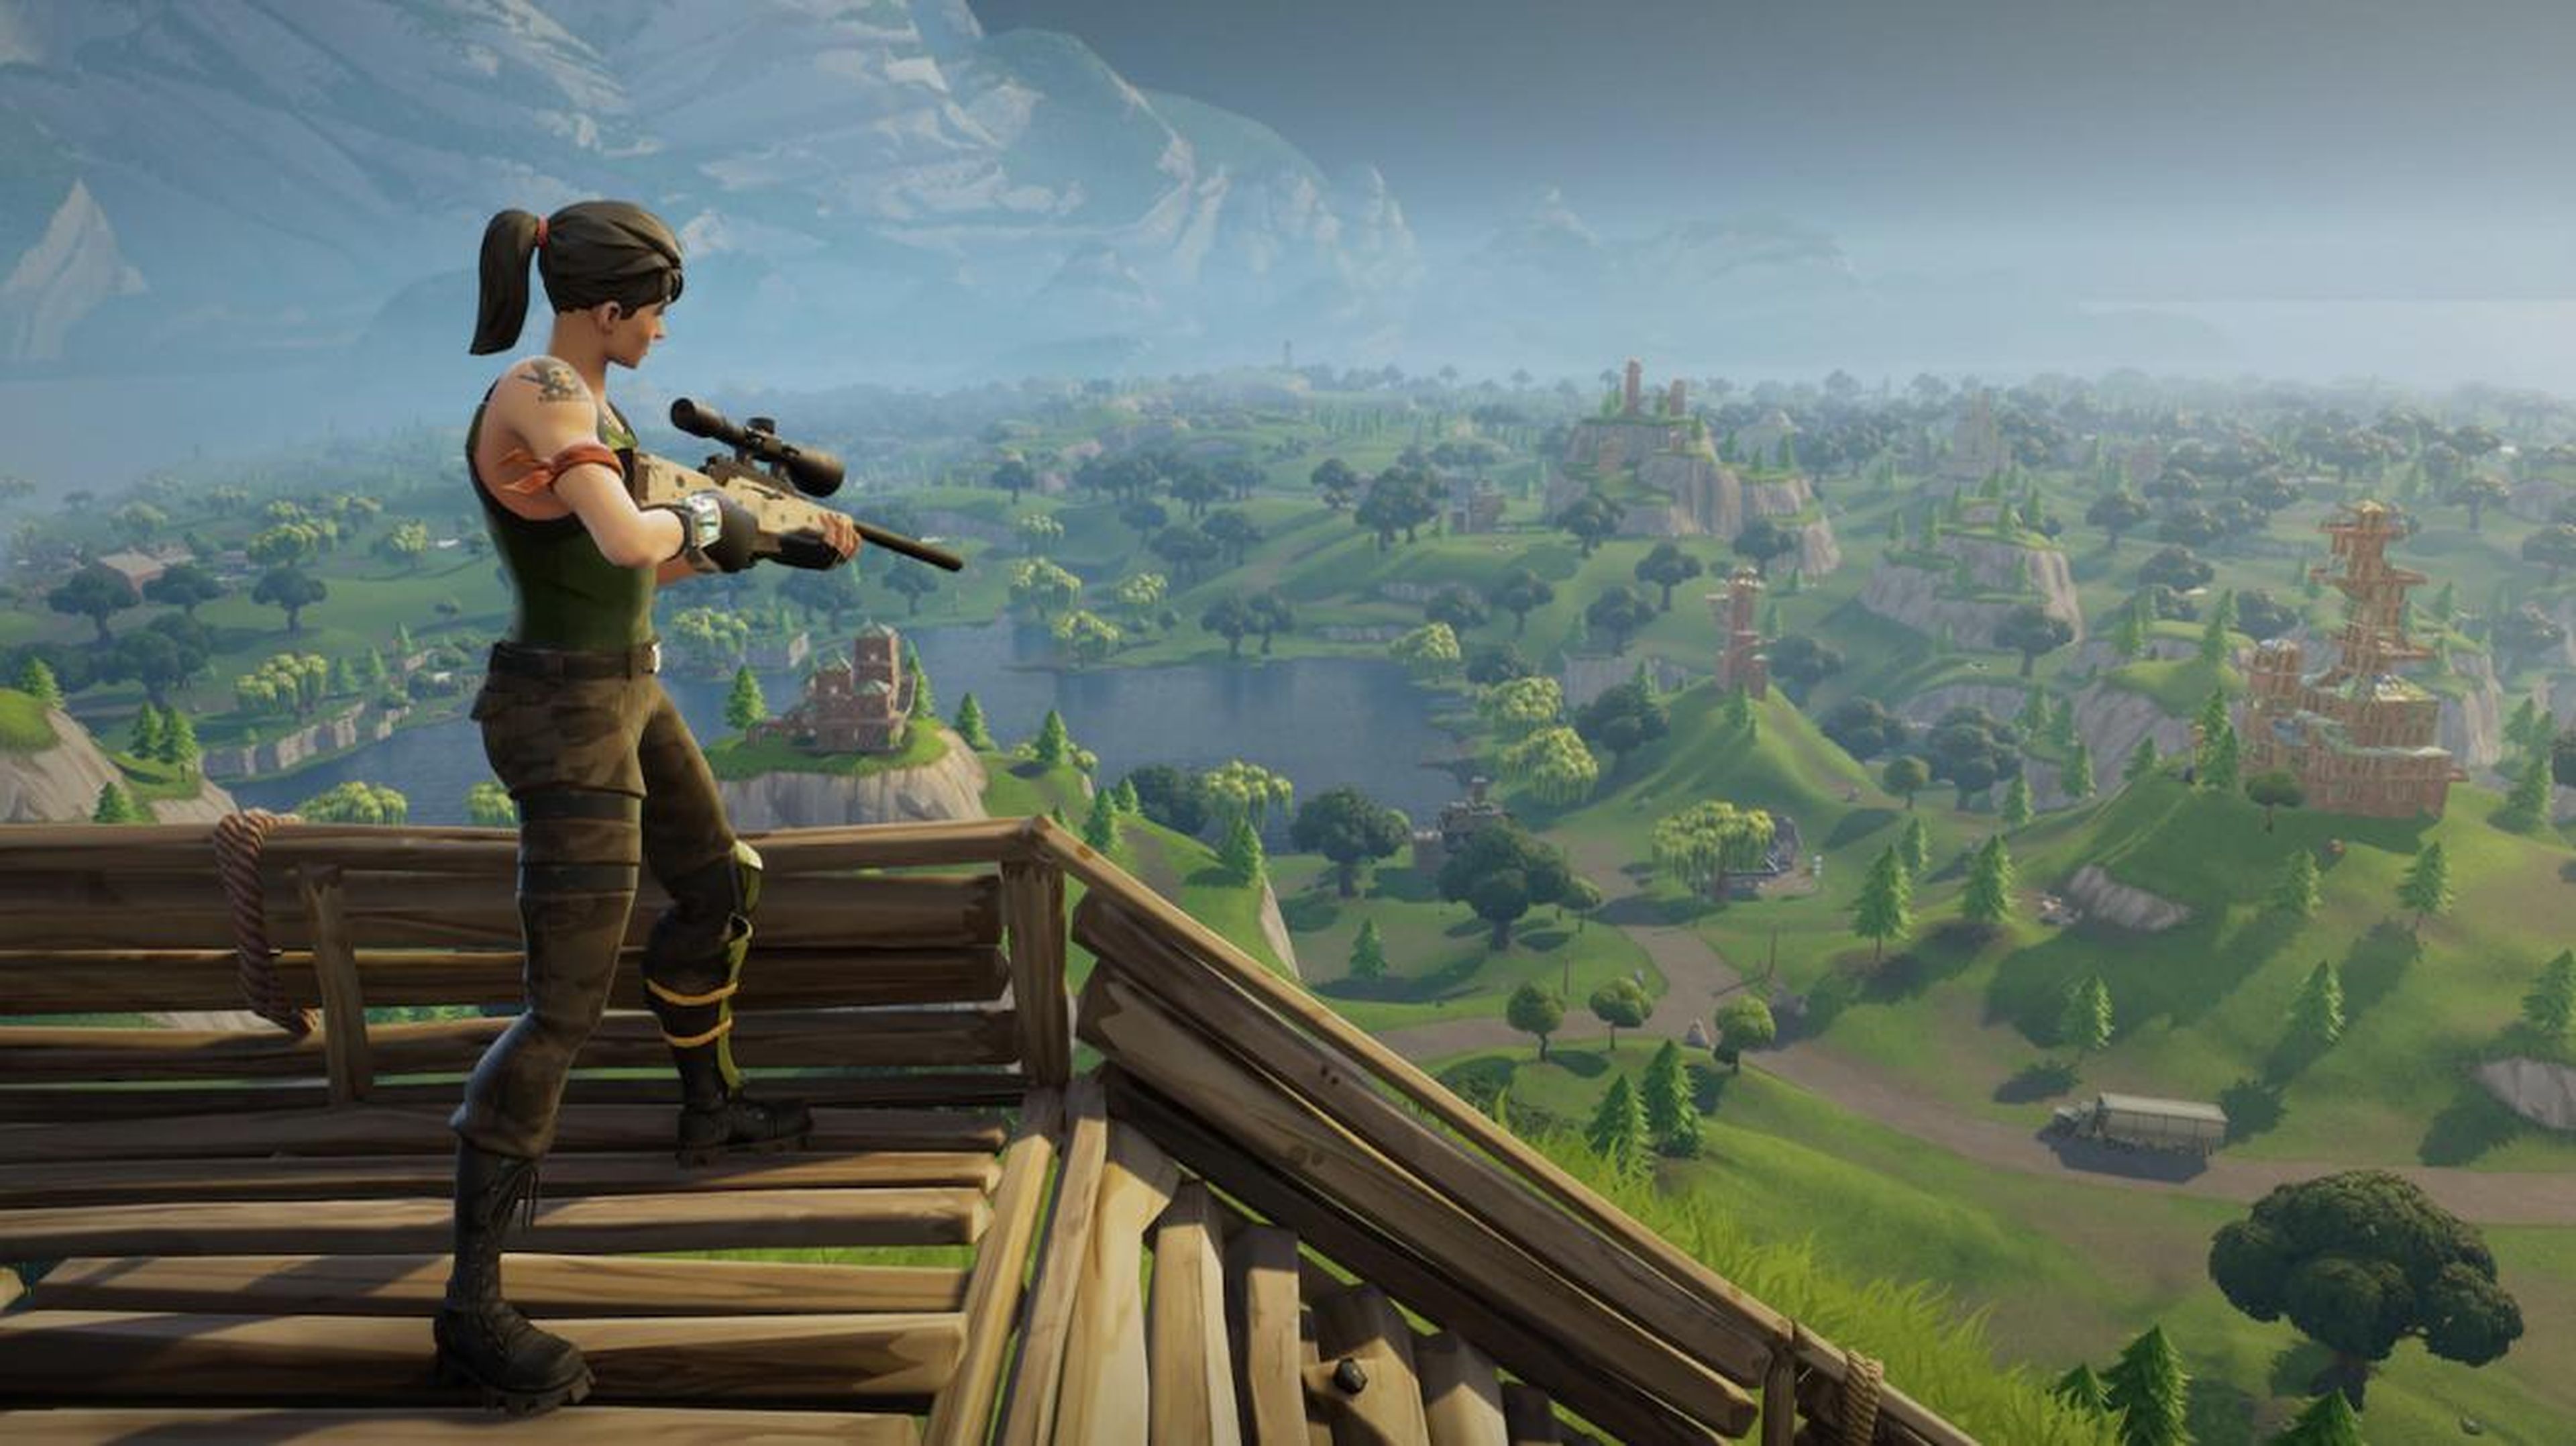 The creators of "Fortnite" are cracking down on cheaters.